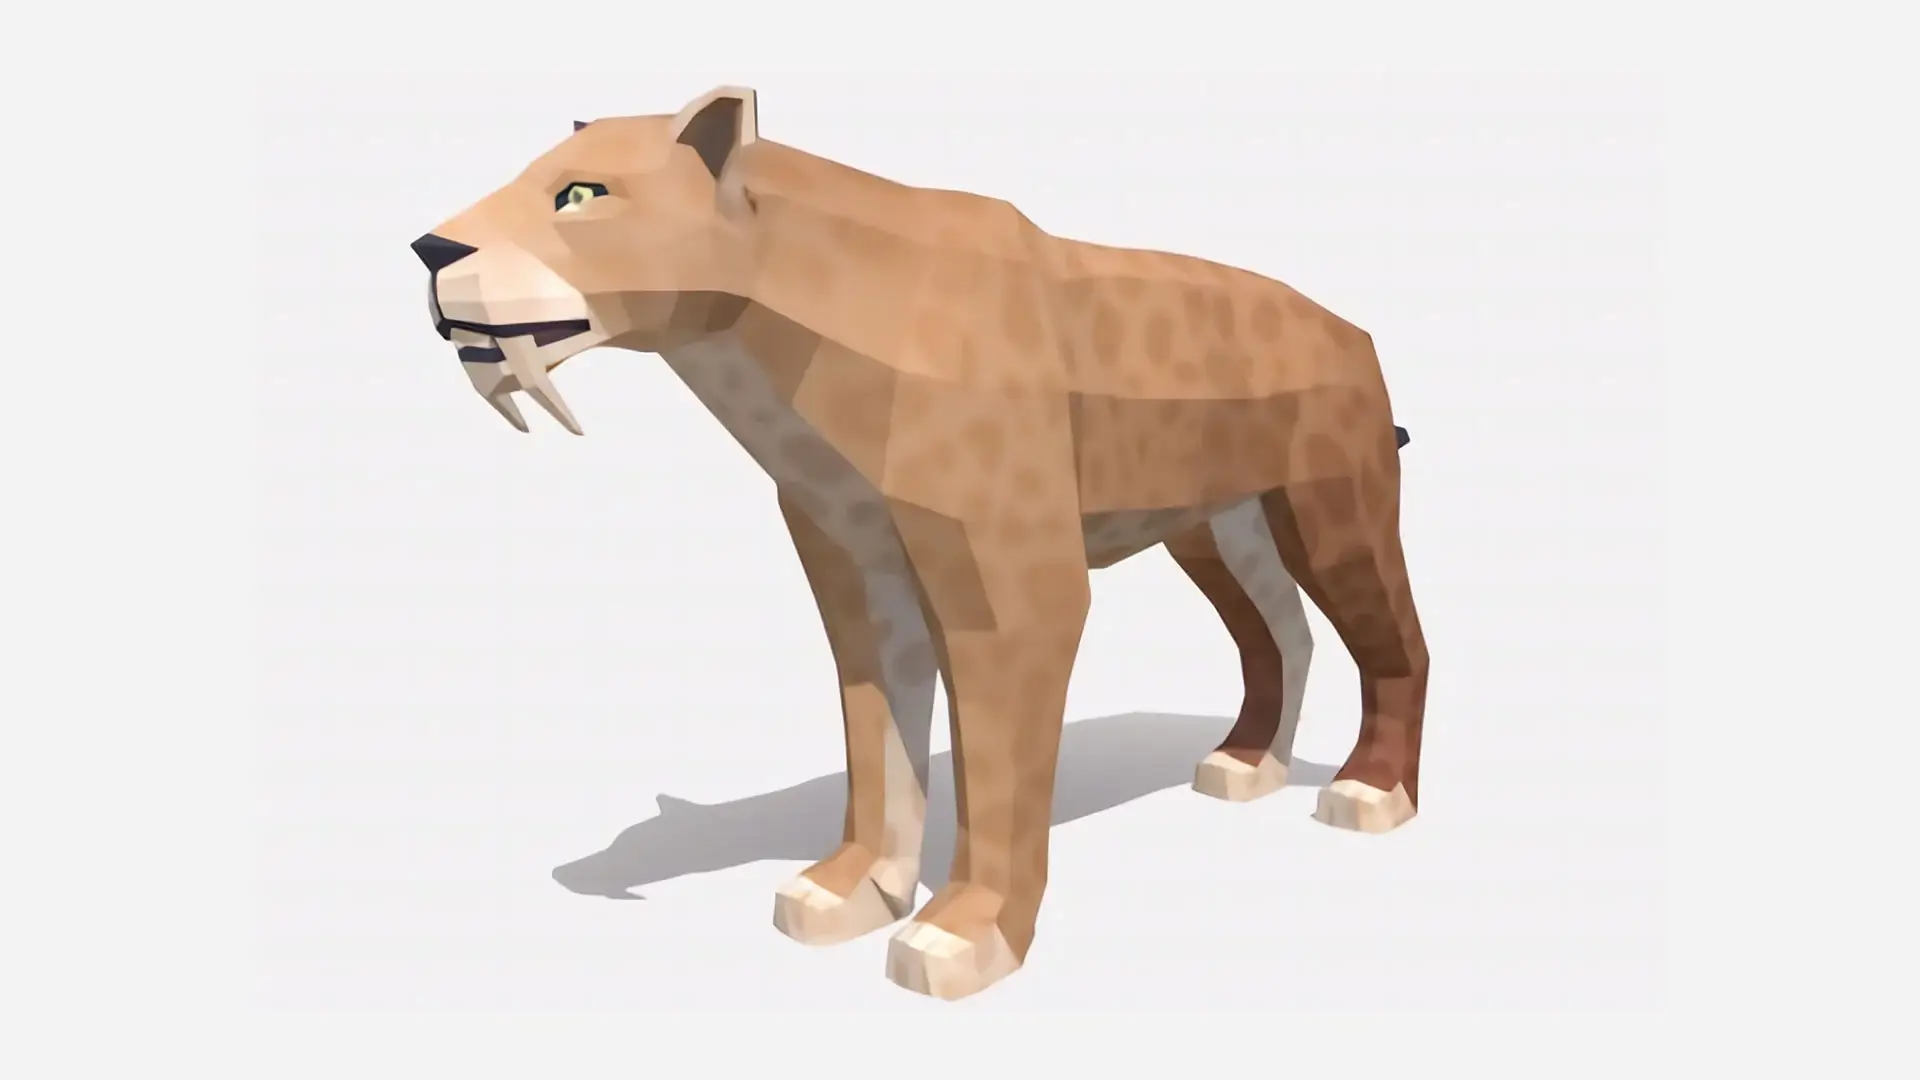 Ice Age Animals Come to Life via Augmented Reality